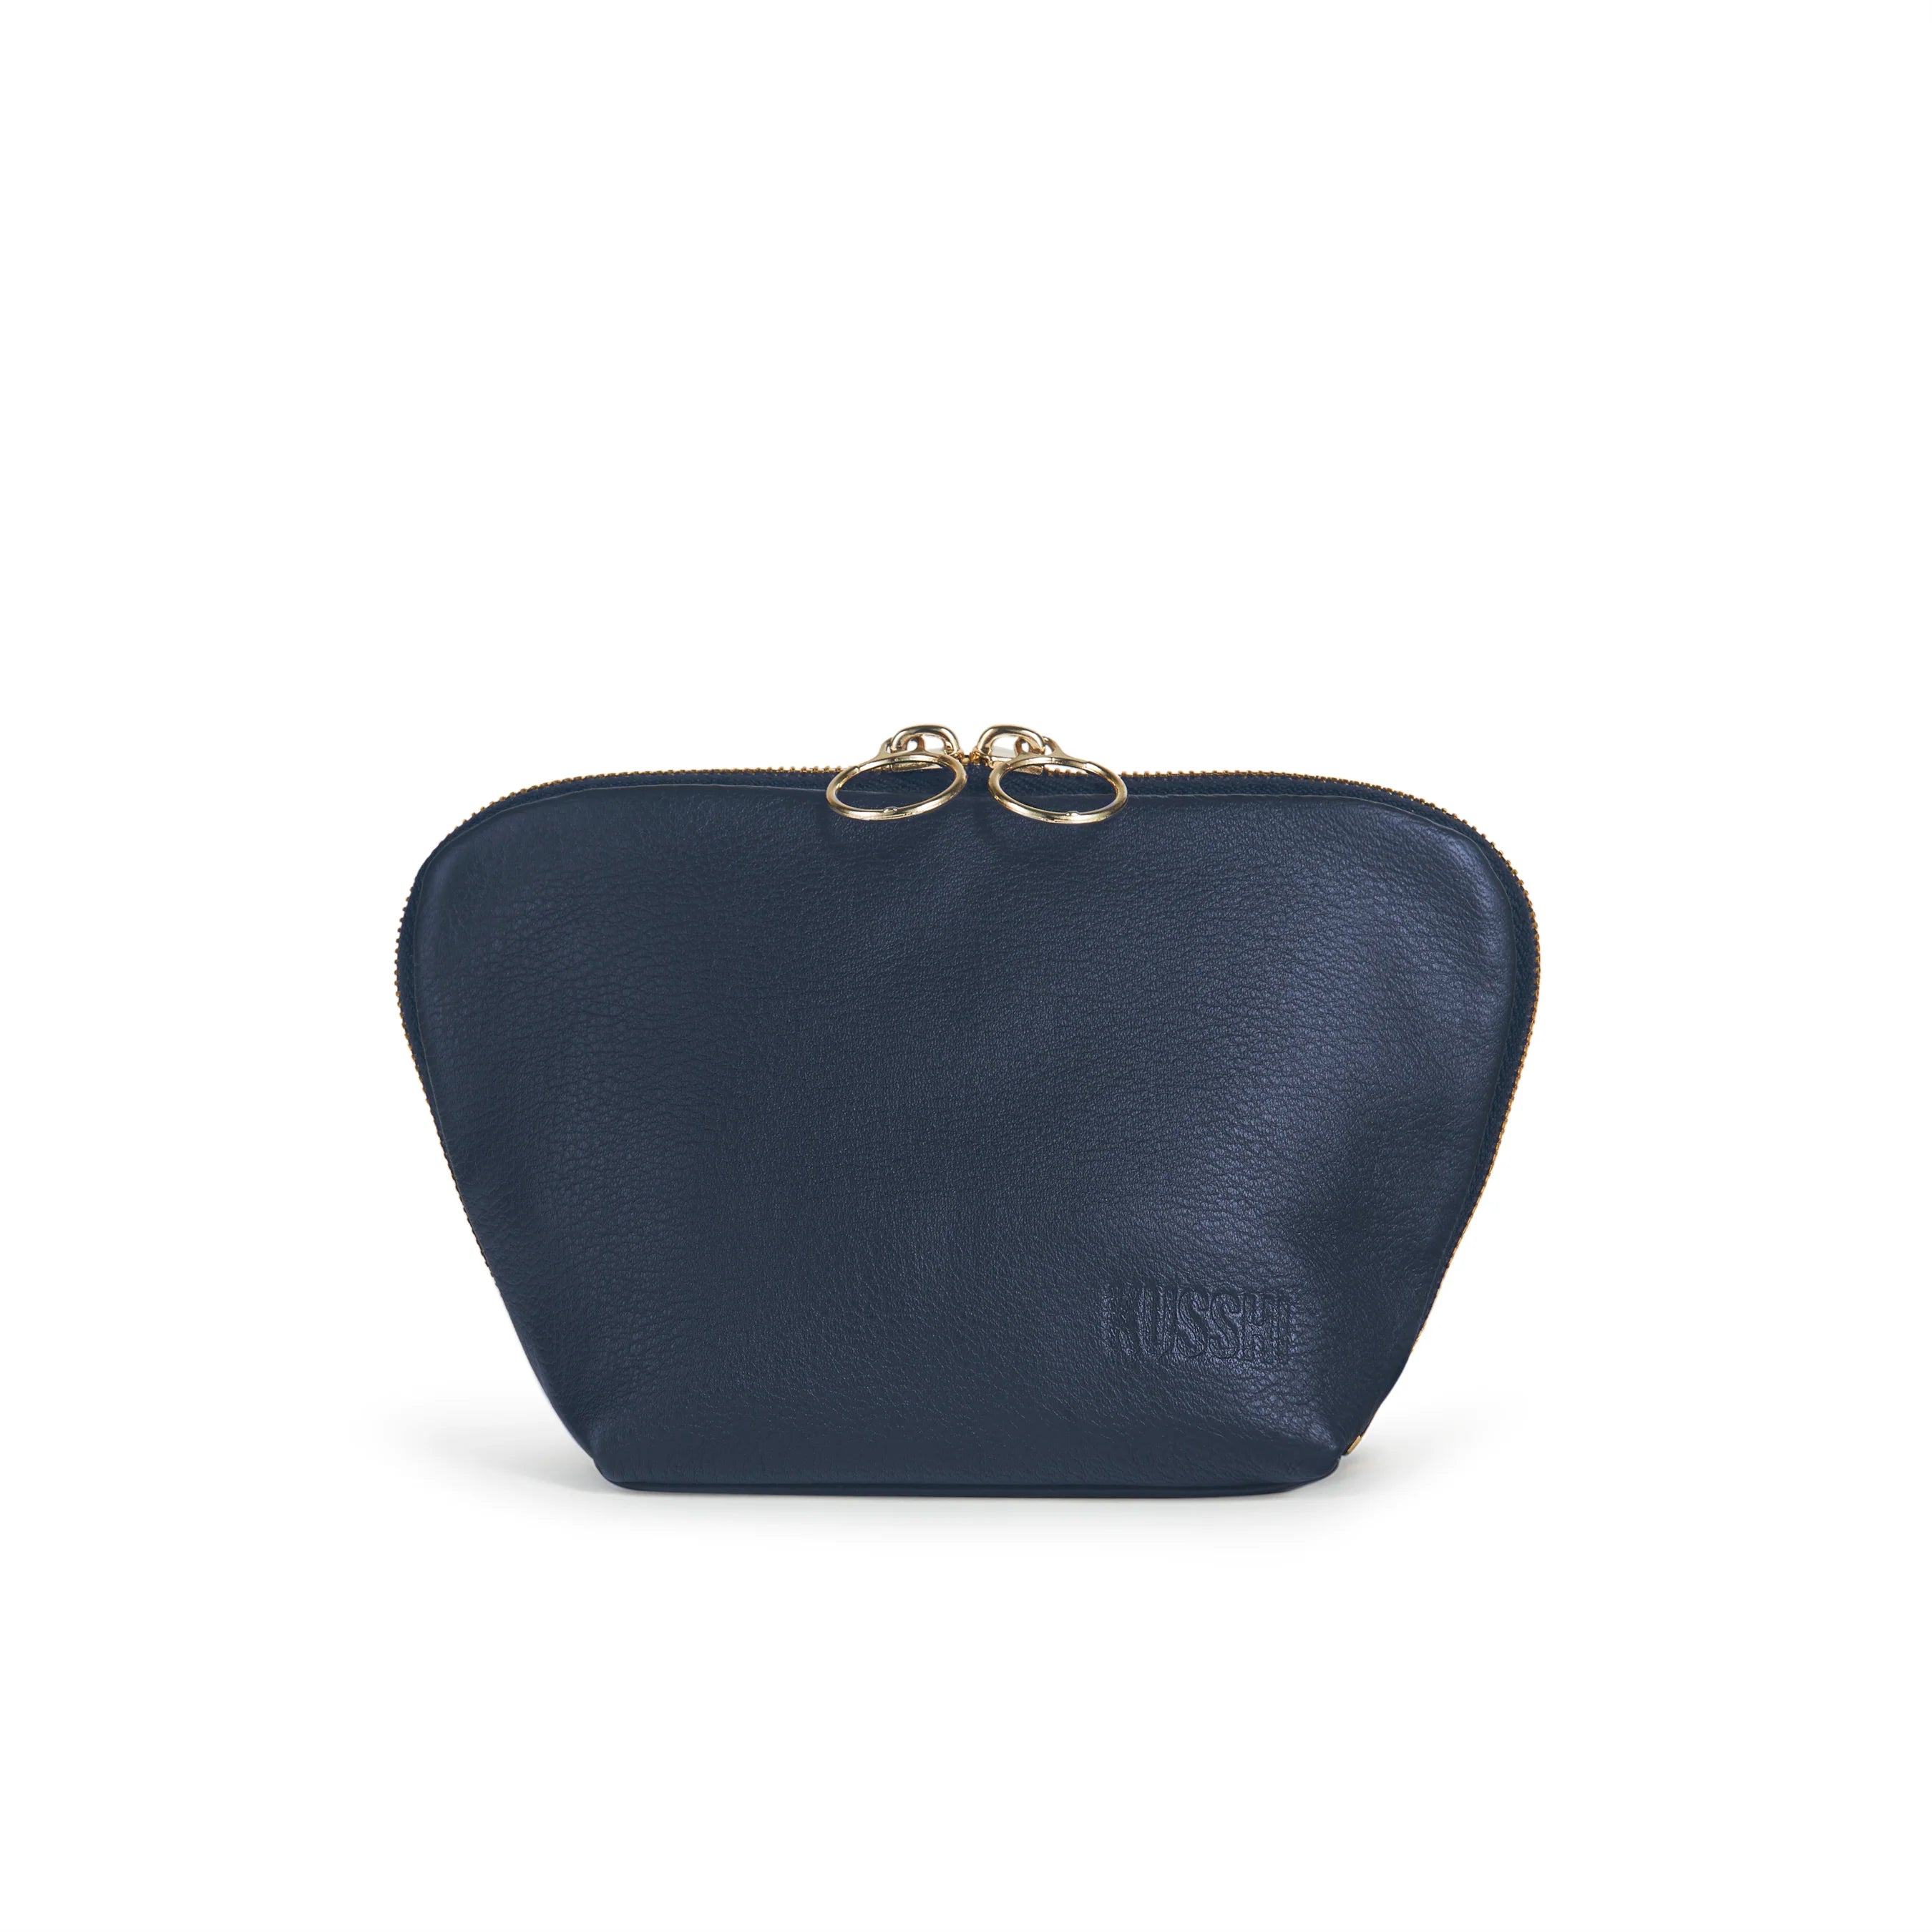 KUSSHI Everyday Makeup Bag Navy Leather with Pink Interior